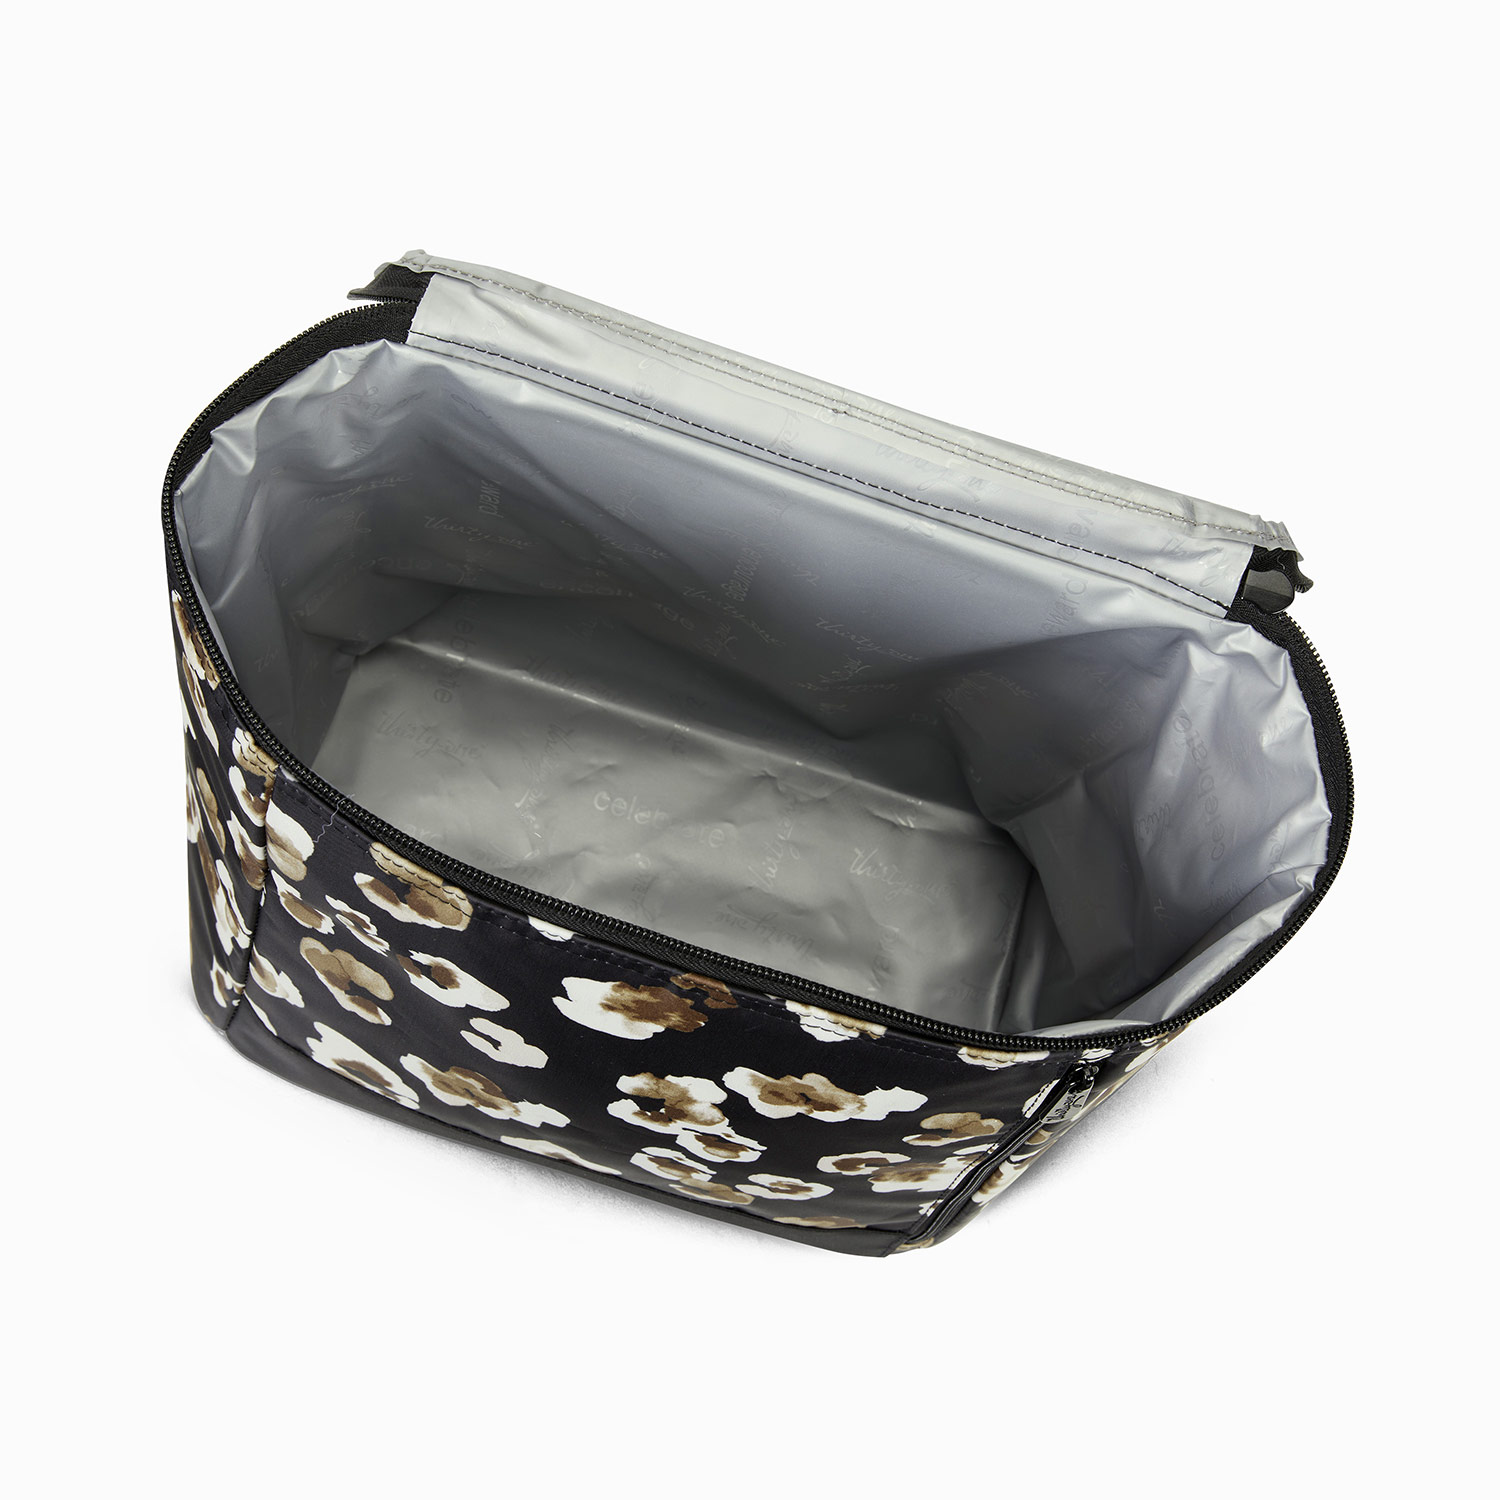 thirty-one, Bags, New Thirtyone Insulated Lunch Bag Black White